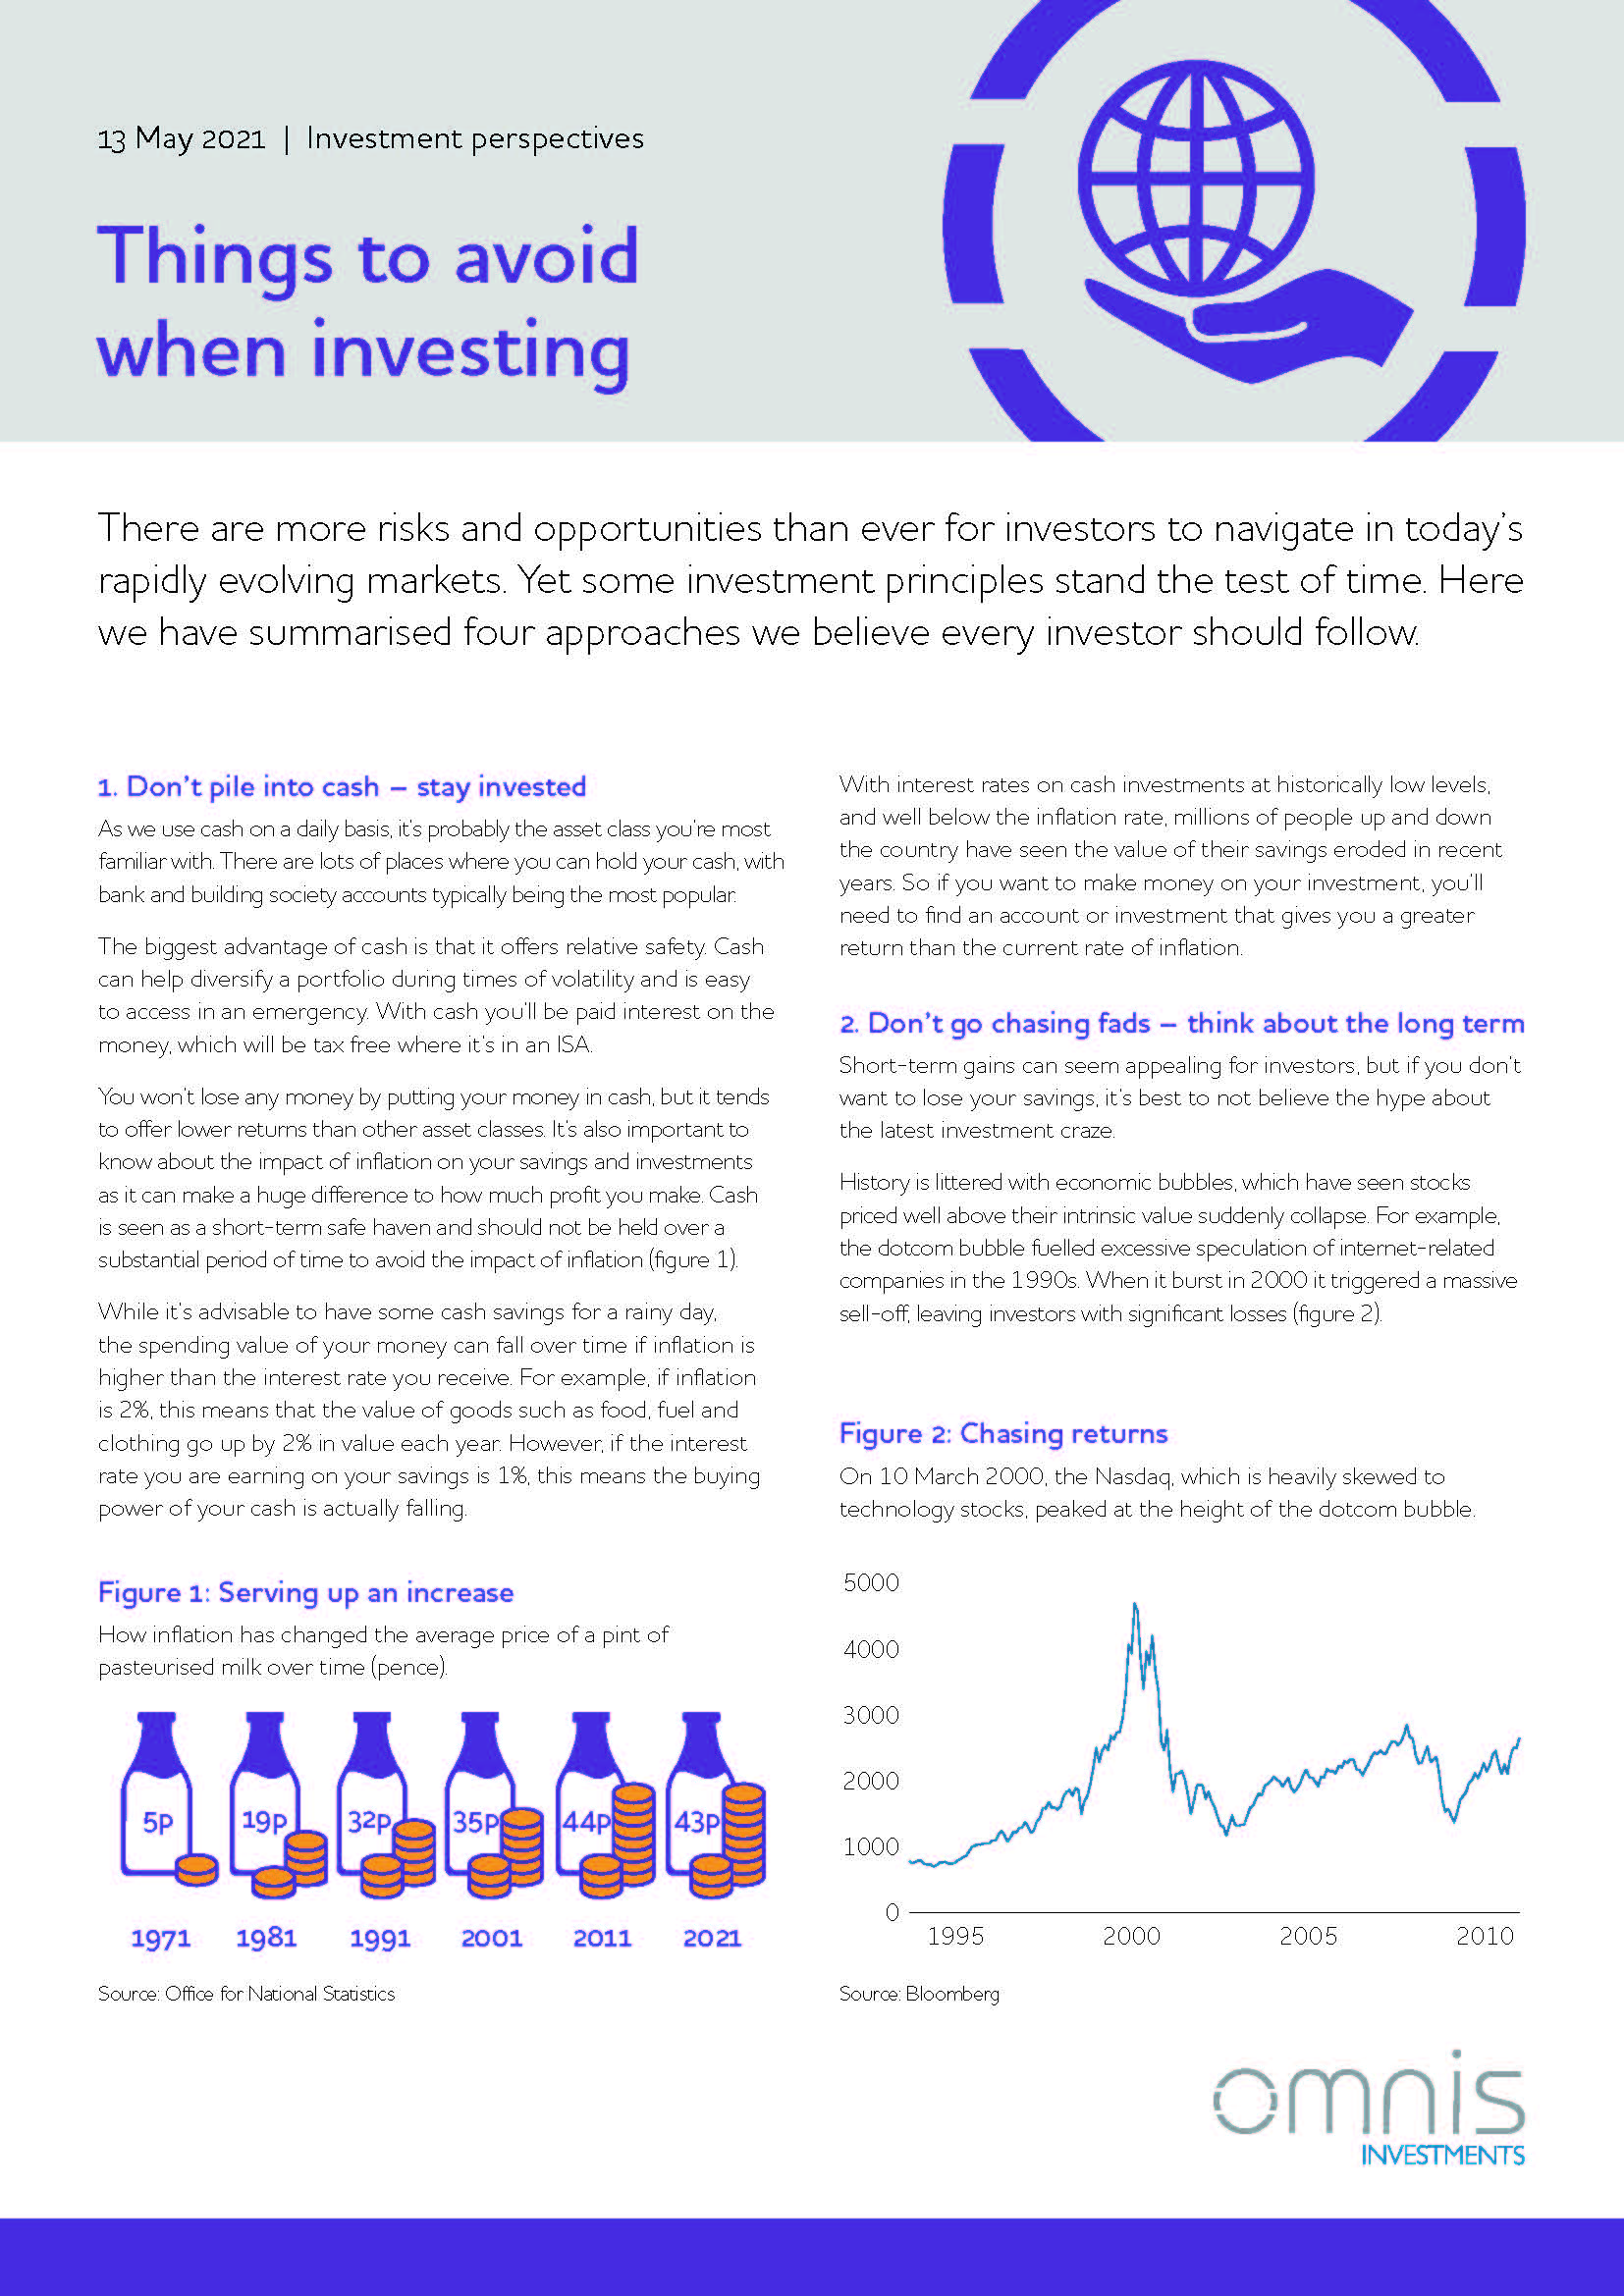 Pages from Omnis-Investment-Perspectives-Things-to-avoid-when-investing-13-May-2021.jpg